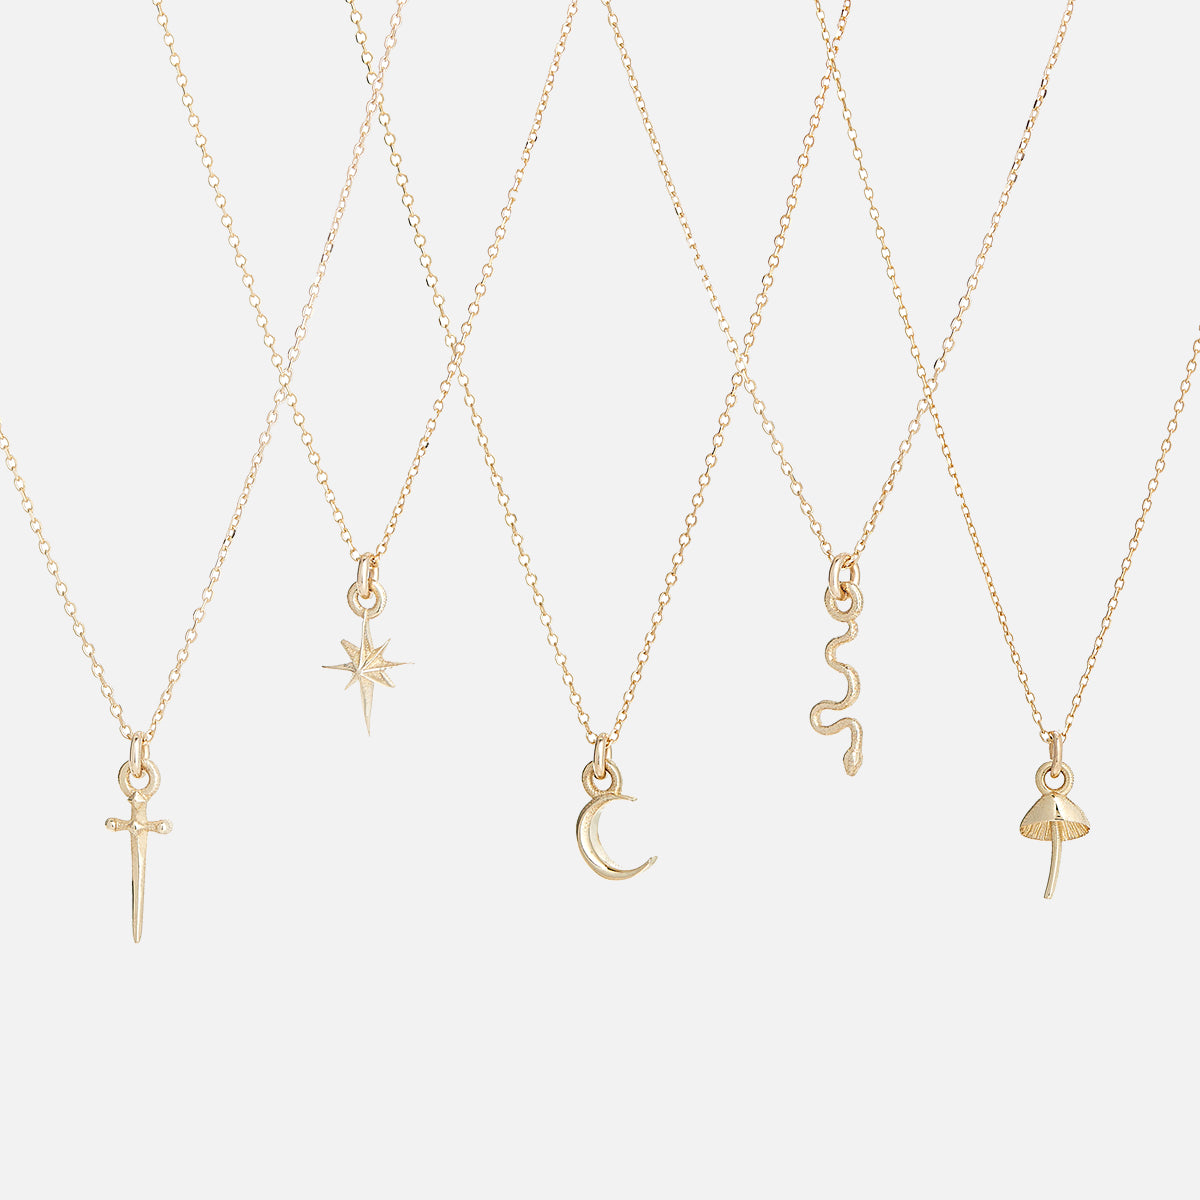 Itty Bitty Charm Necklace, Crescent